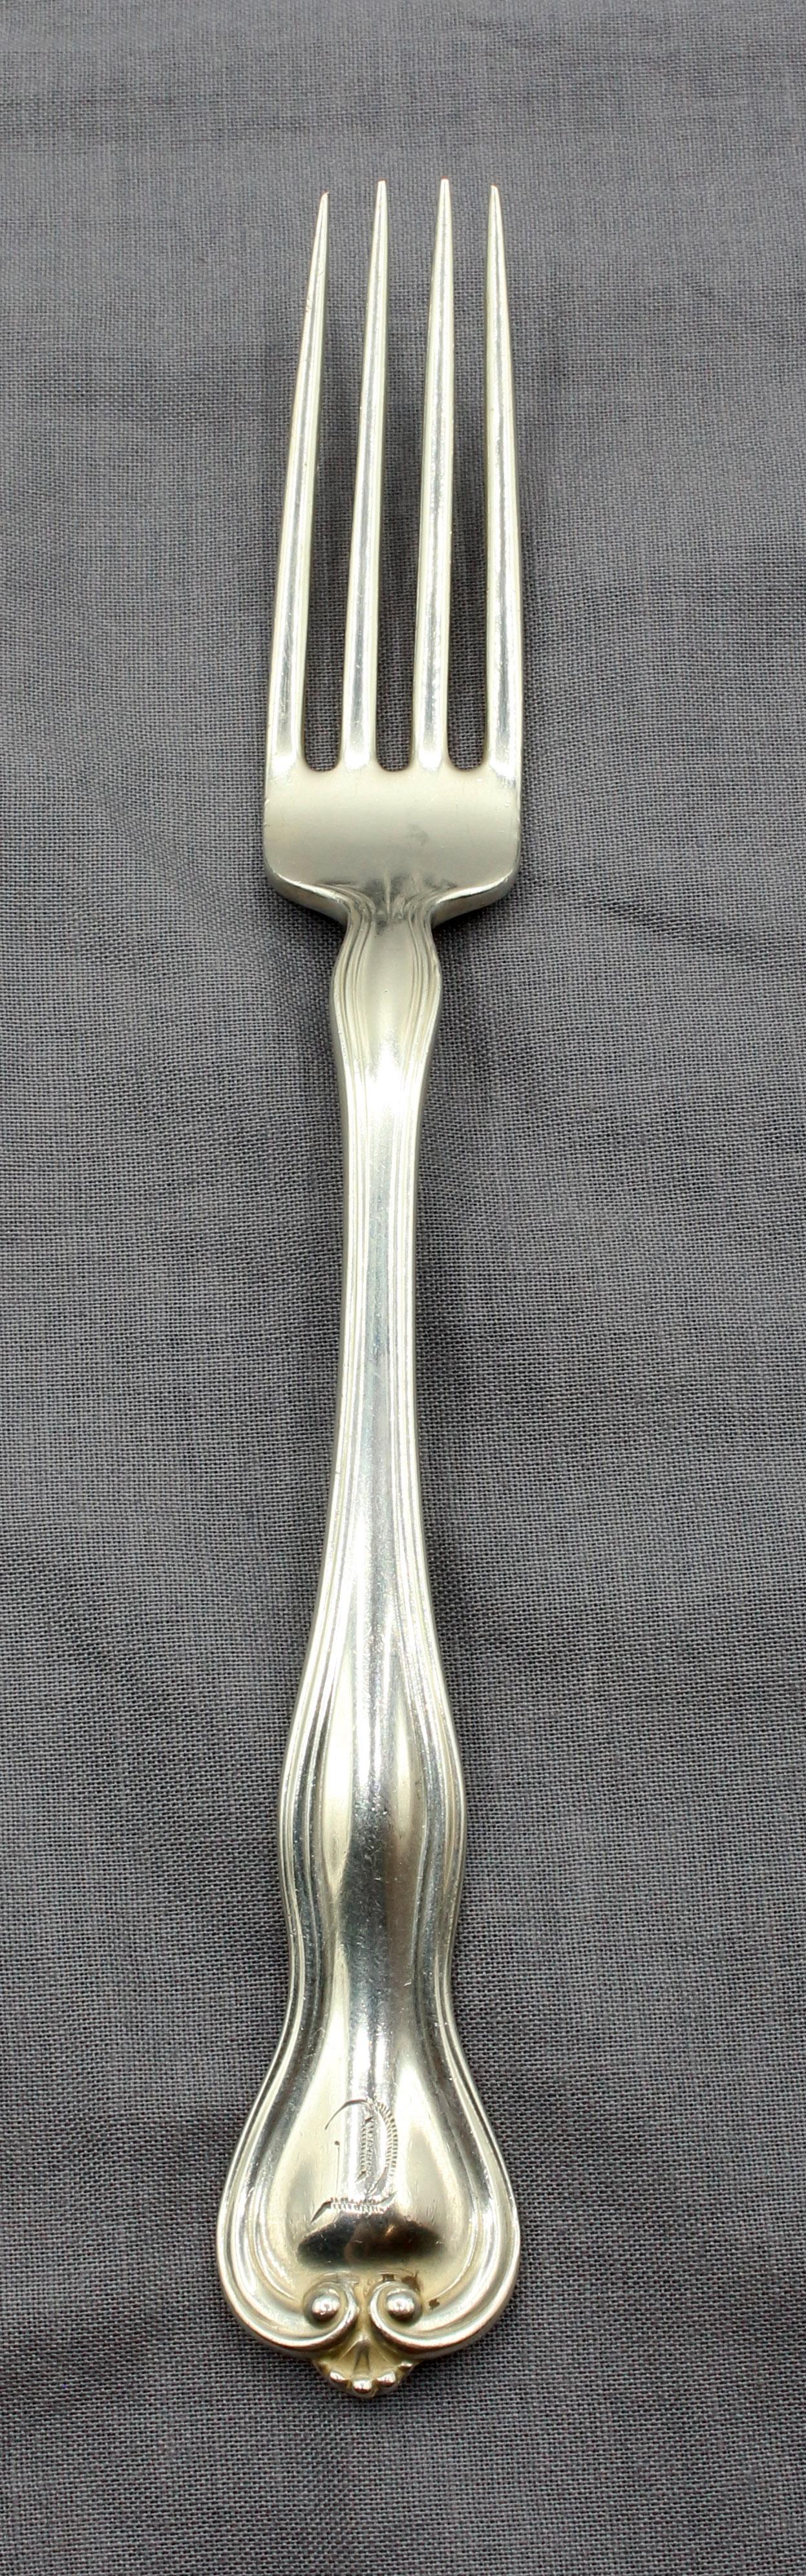 Set of 6 sterling silver luncheon or place forks, Mount Vernon pattern of 1907 by Watson. With the hallmark used form 1879-1907. Monogram D? 9.05 troy oz.
7